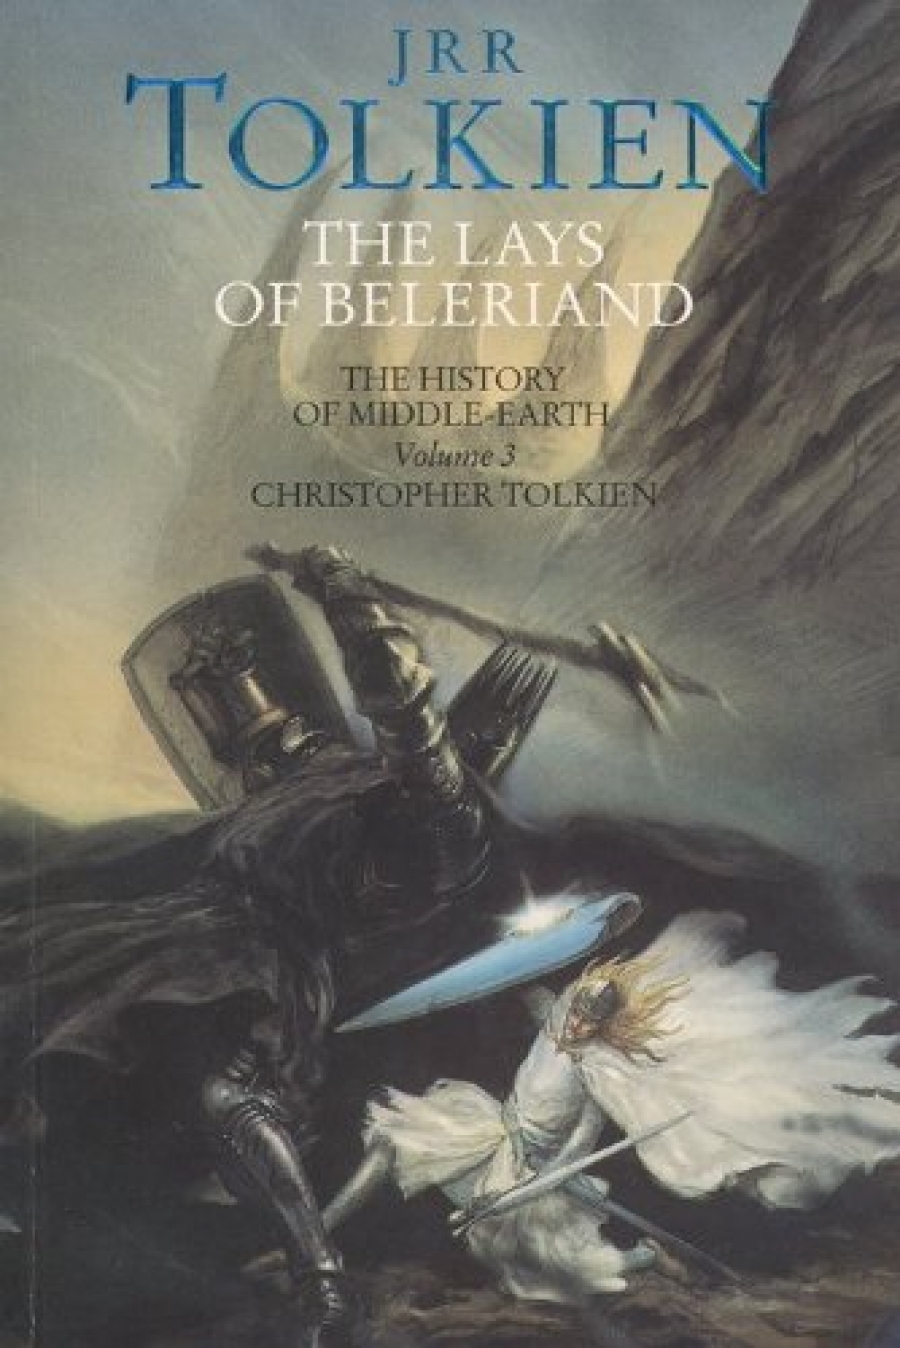 Tolkien, J.R.R. Lays of Beleriand (History of Middle-Earth) 